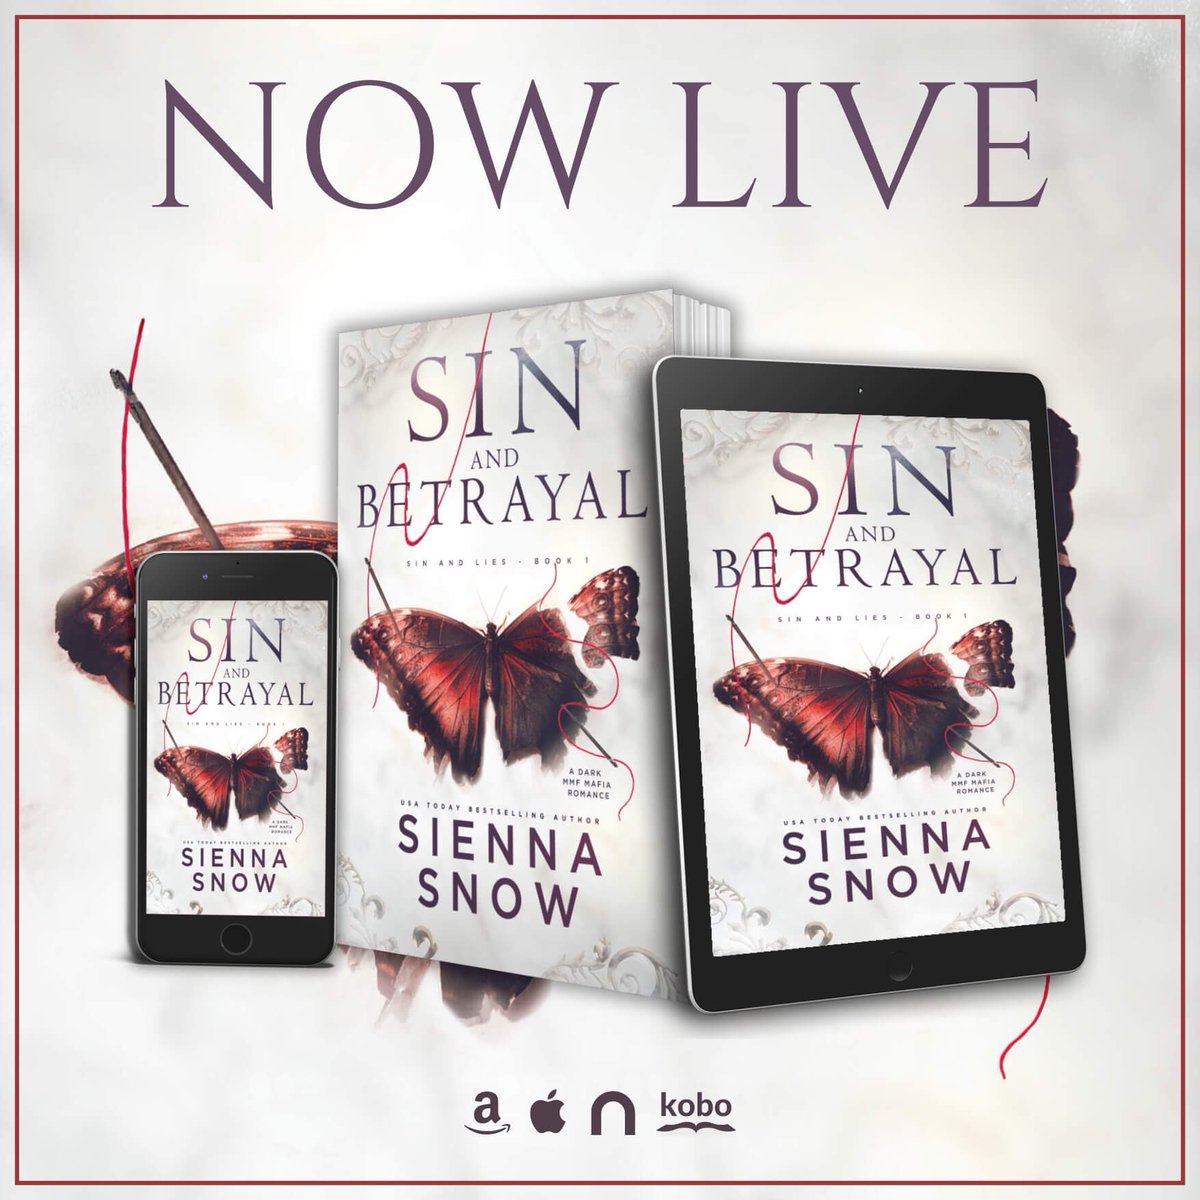 ✨Did you see?✨ SIN AND BETRAYAL by @bysiennasnow is available NOW! Grab it at your favorite book retailer! 
#OneClickHere 
geni.us/SinAndBetrayal 
#siennasnow #mafiaromance #enemiestolovers #touchheranddie #forcedproximity #mmf #romancebooks #spicyromance #theauthoragency